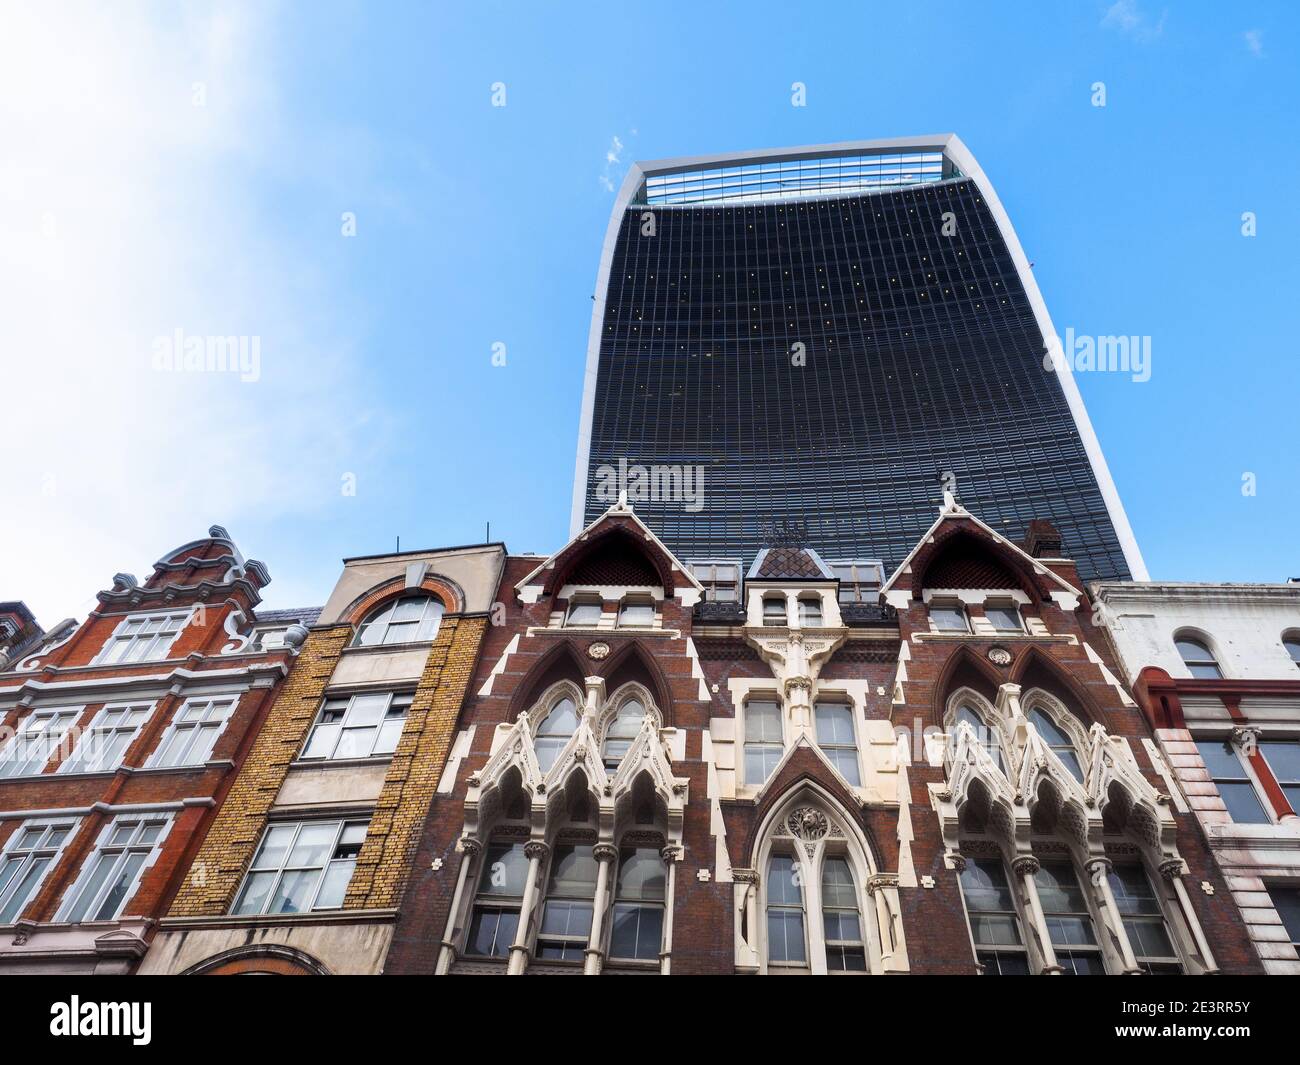 The walkie talkie building in 20 Fenchurch Street - London, England Stock Photo